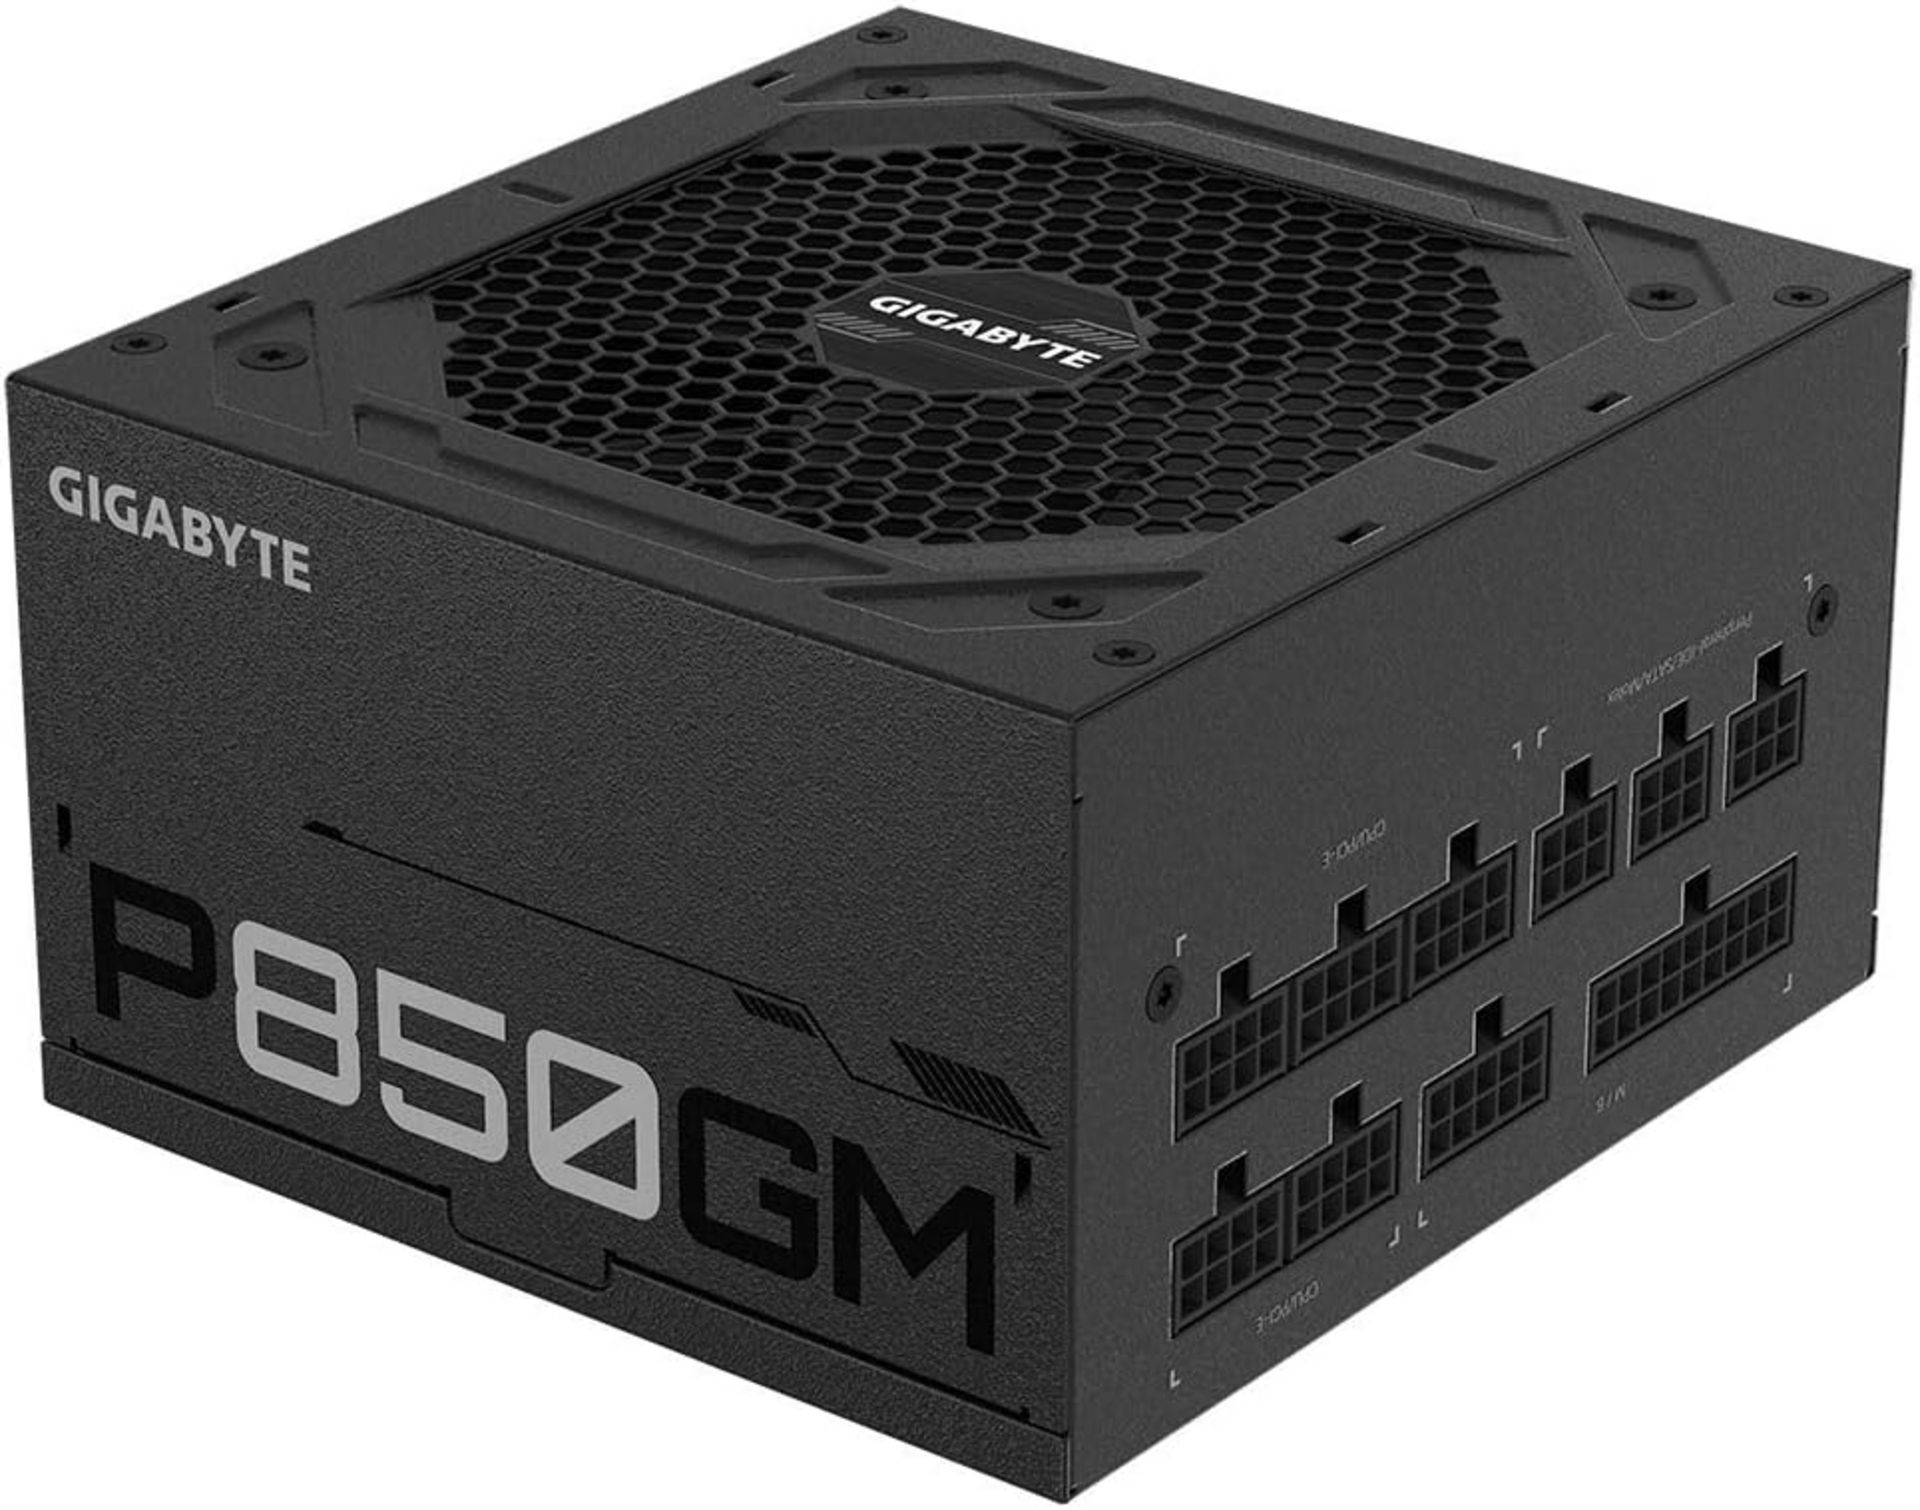 BRAND NEW FACTORY SEALED GIGABYTE P850GM V2 80 Plus Gold Certified PSU. RRP £99.99. FULLY MODULAR - Image 2 of 7